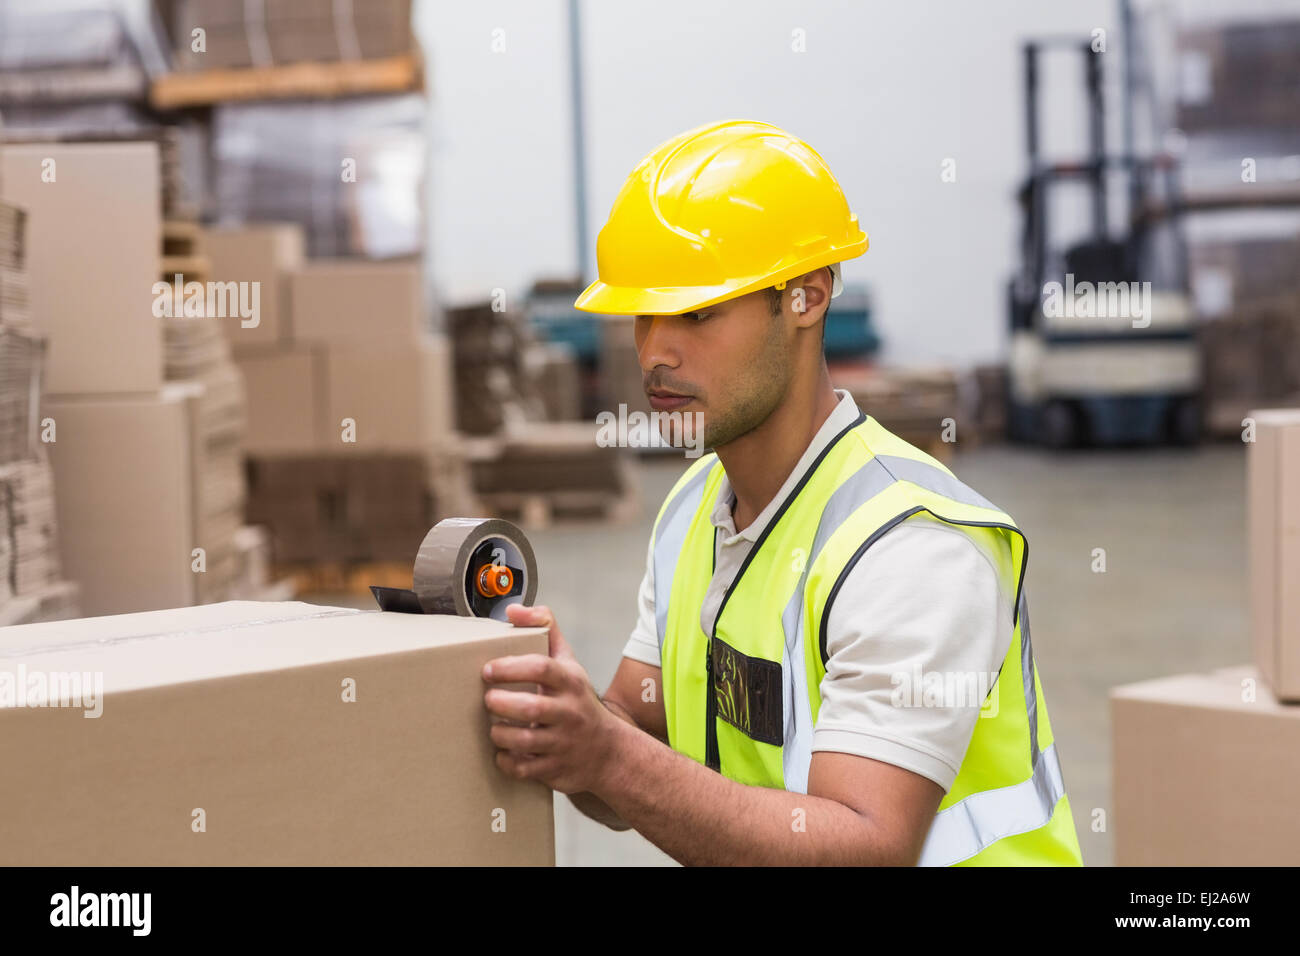 Worker preparing goods for dispatch Stock Photo